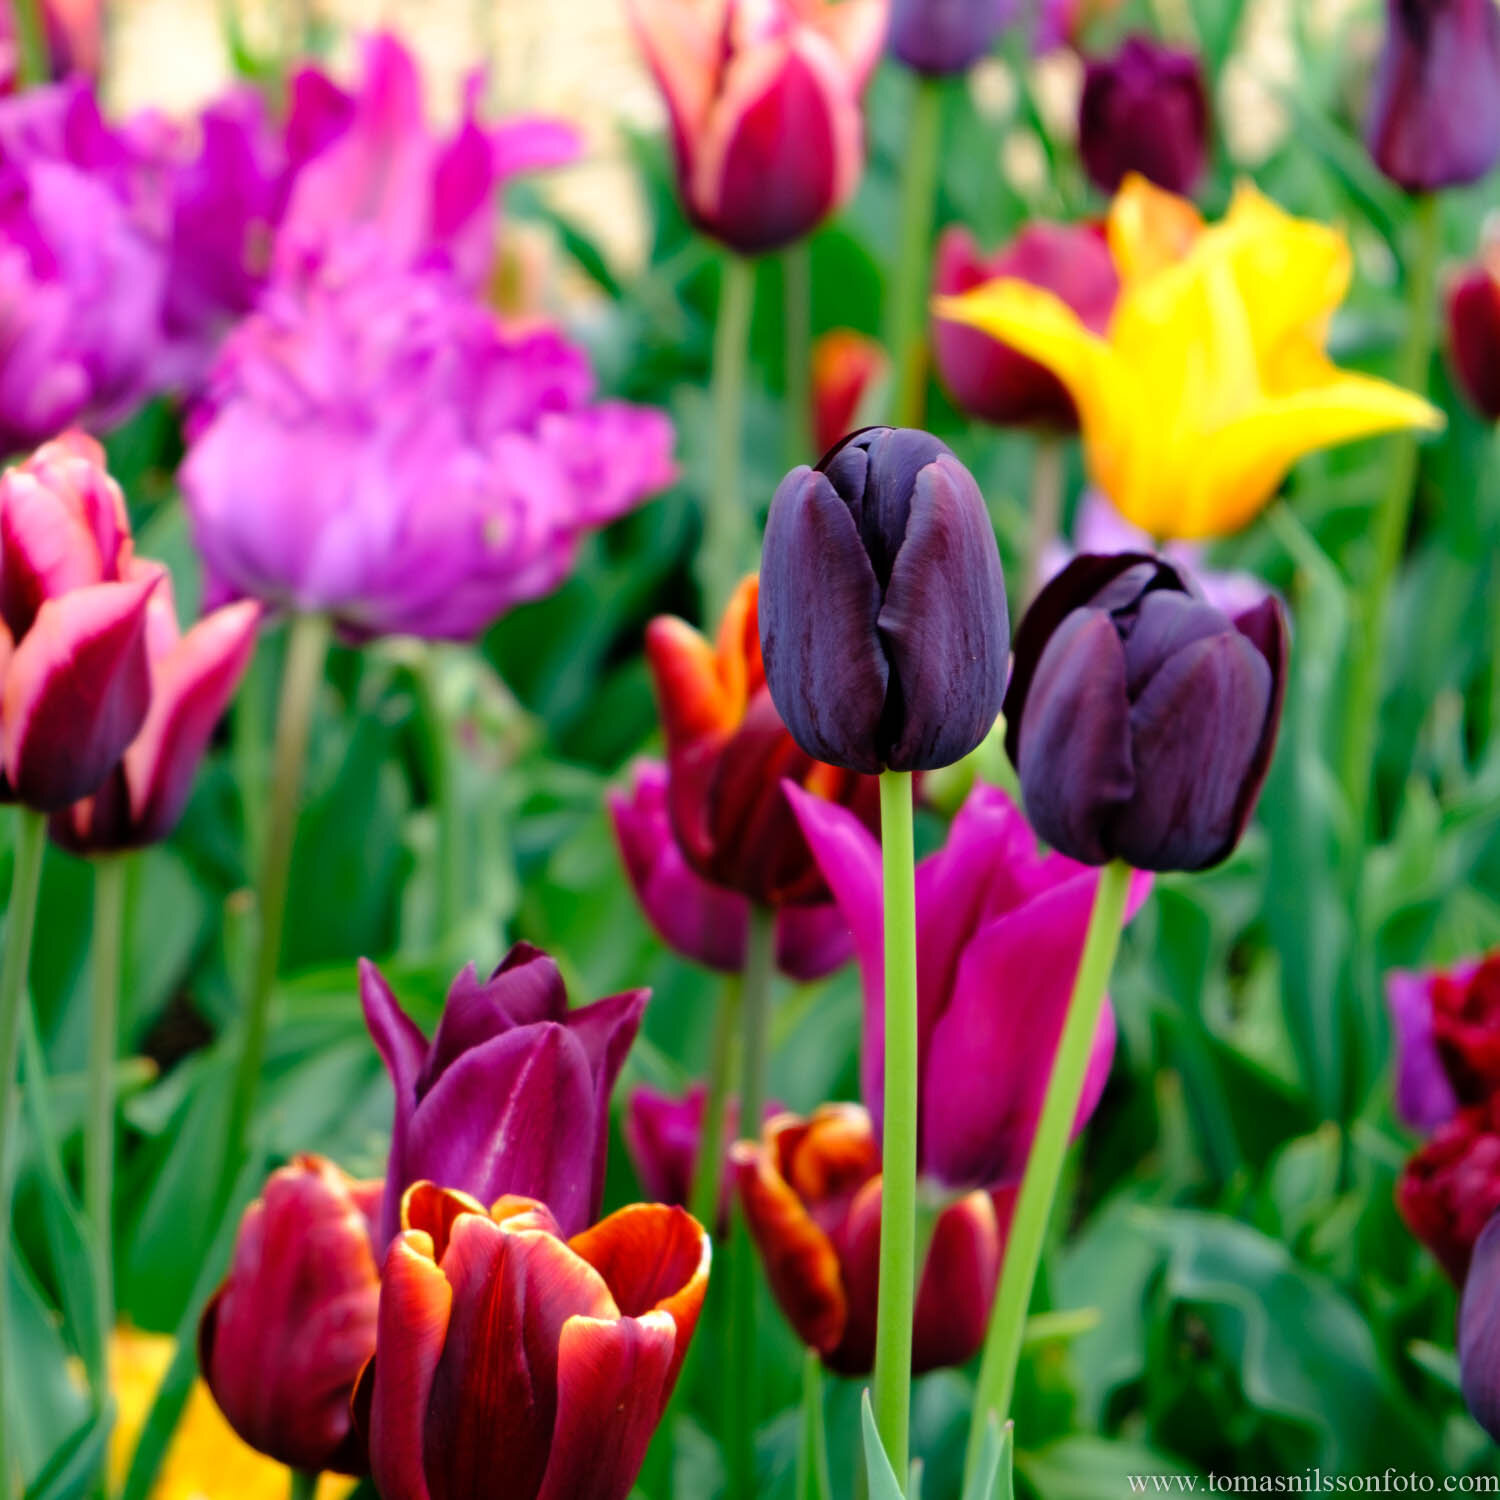 Day 137 - May 17: Technicolor Tulips